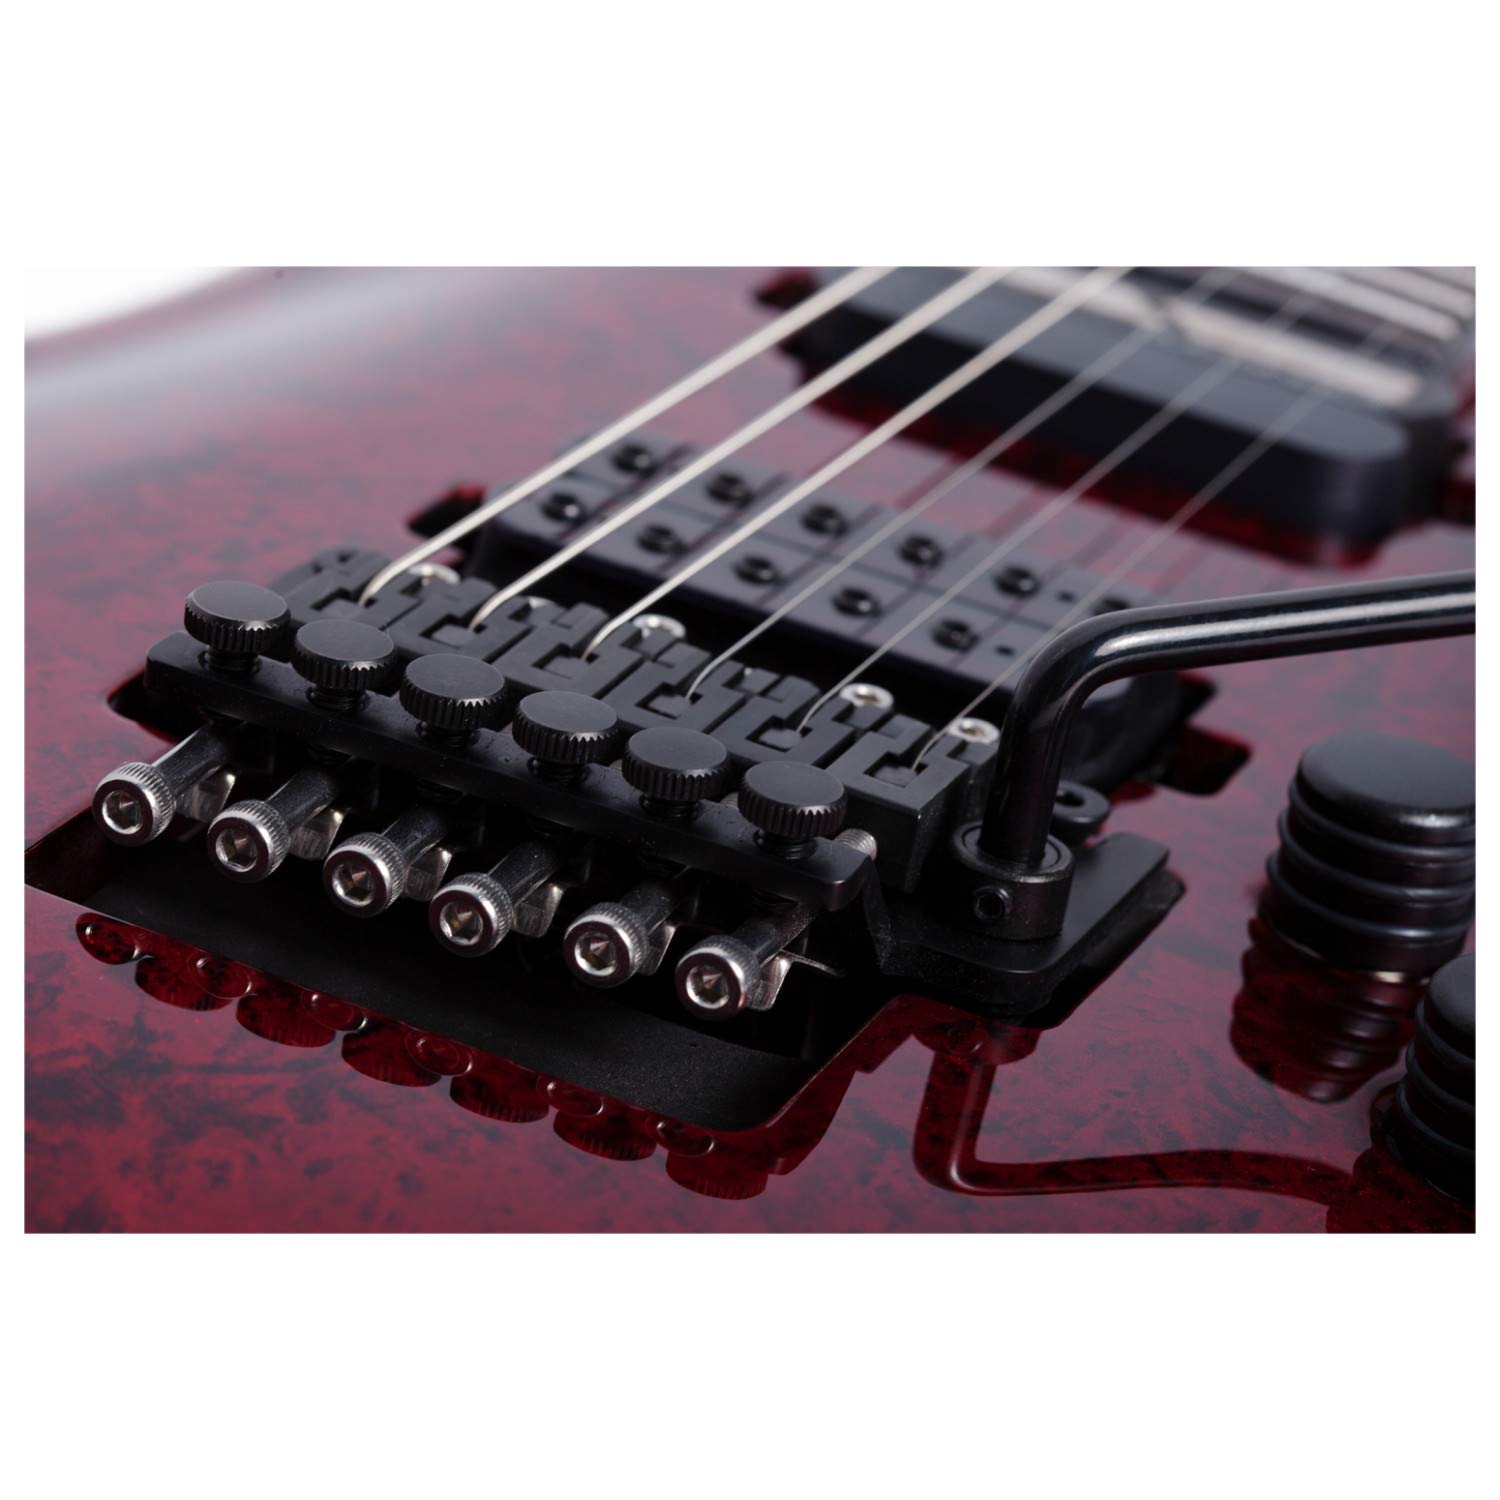 Schecter Apocalypse C-1 Fr S 2h Sustainiac - Red Reign - Double cut electric guitar - Variation 3